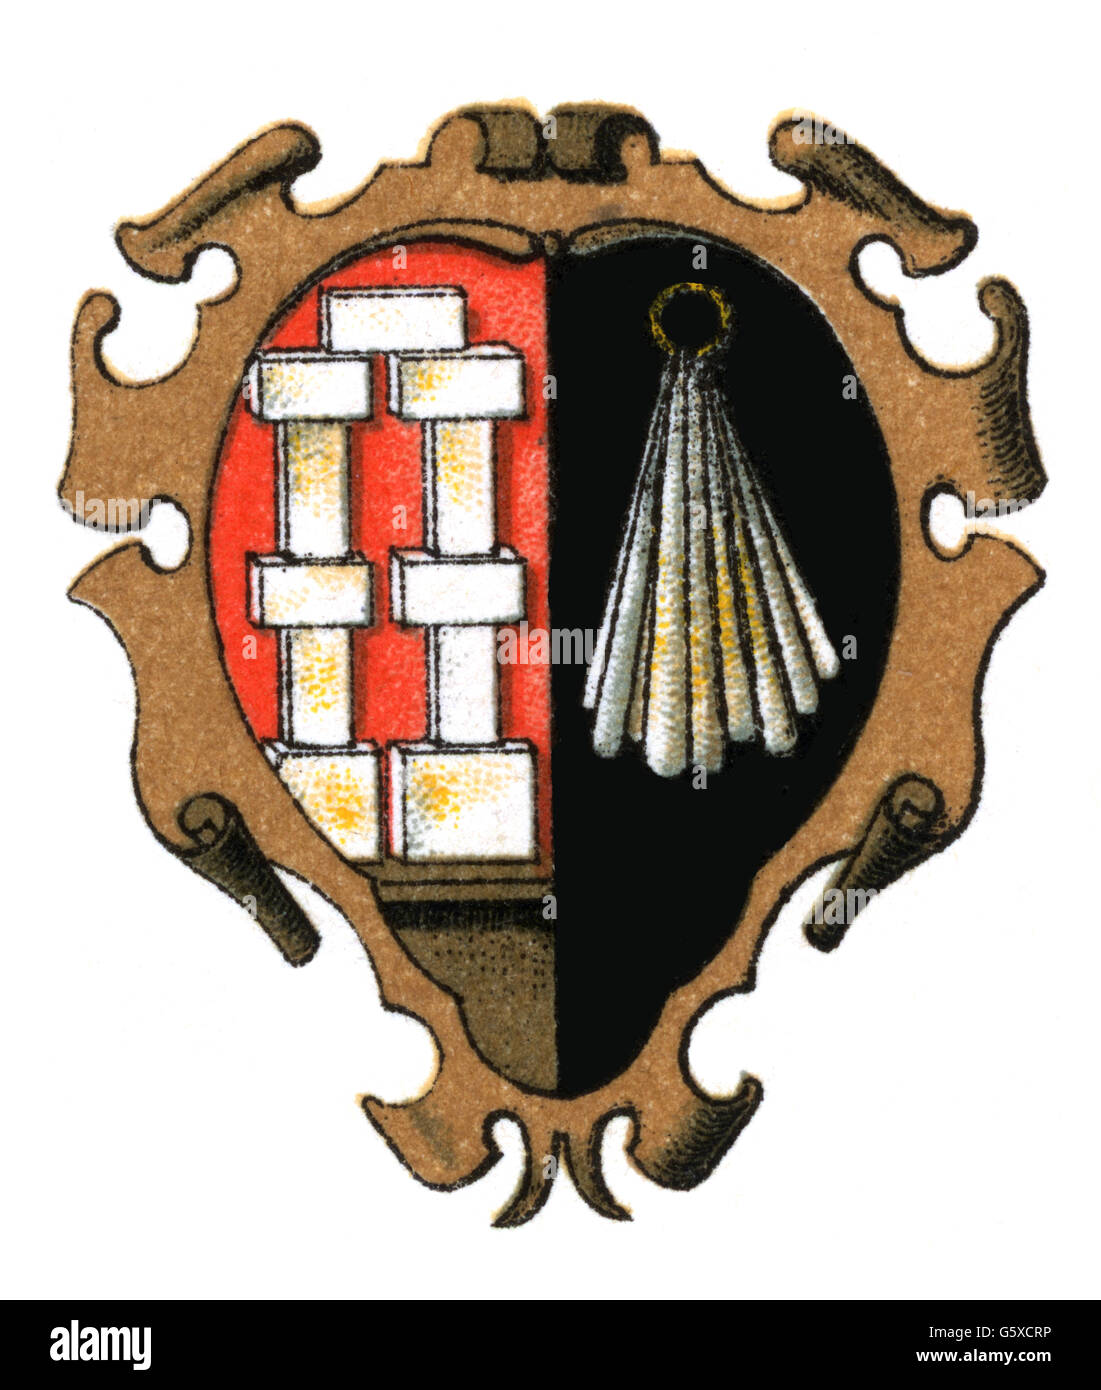 heraldry, coat of arms, guild coat of arms, Germany, soap boilers, Chromolithograph, 19th century, soap boiler, hygienics, guilds, guild symbol, handicraft, handcraft, craft, profession, professions, historic, historical, clipping, cut out, cut-out, cut-outs, Additional-Rights-Clearences-Not Available Stock Photo